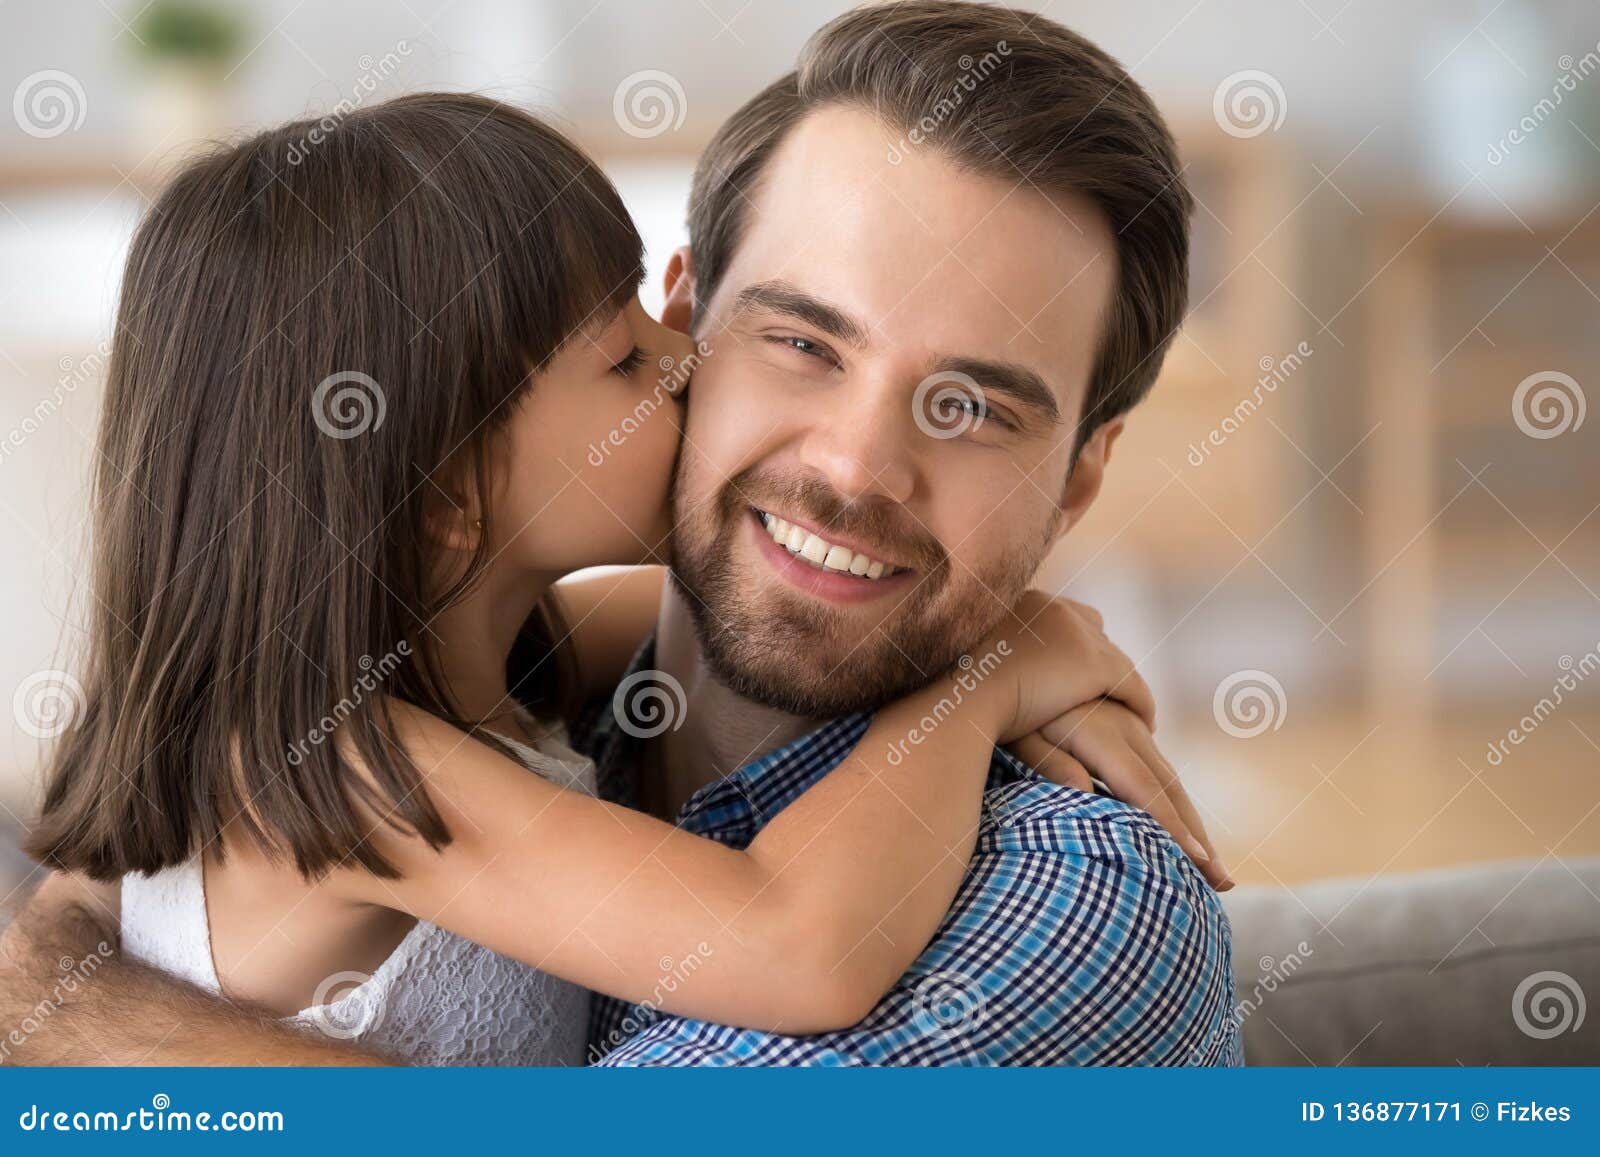 Cute Kid Daughter Embracing Kissing Young Happy Dad on Cheek Stock ...